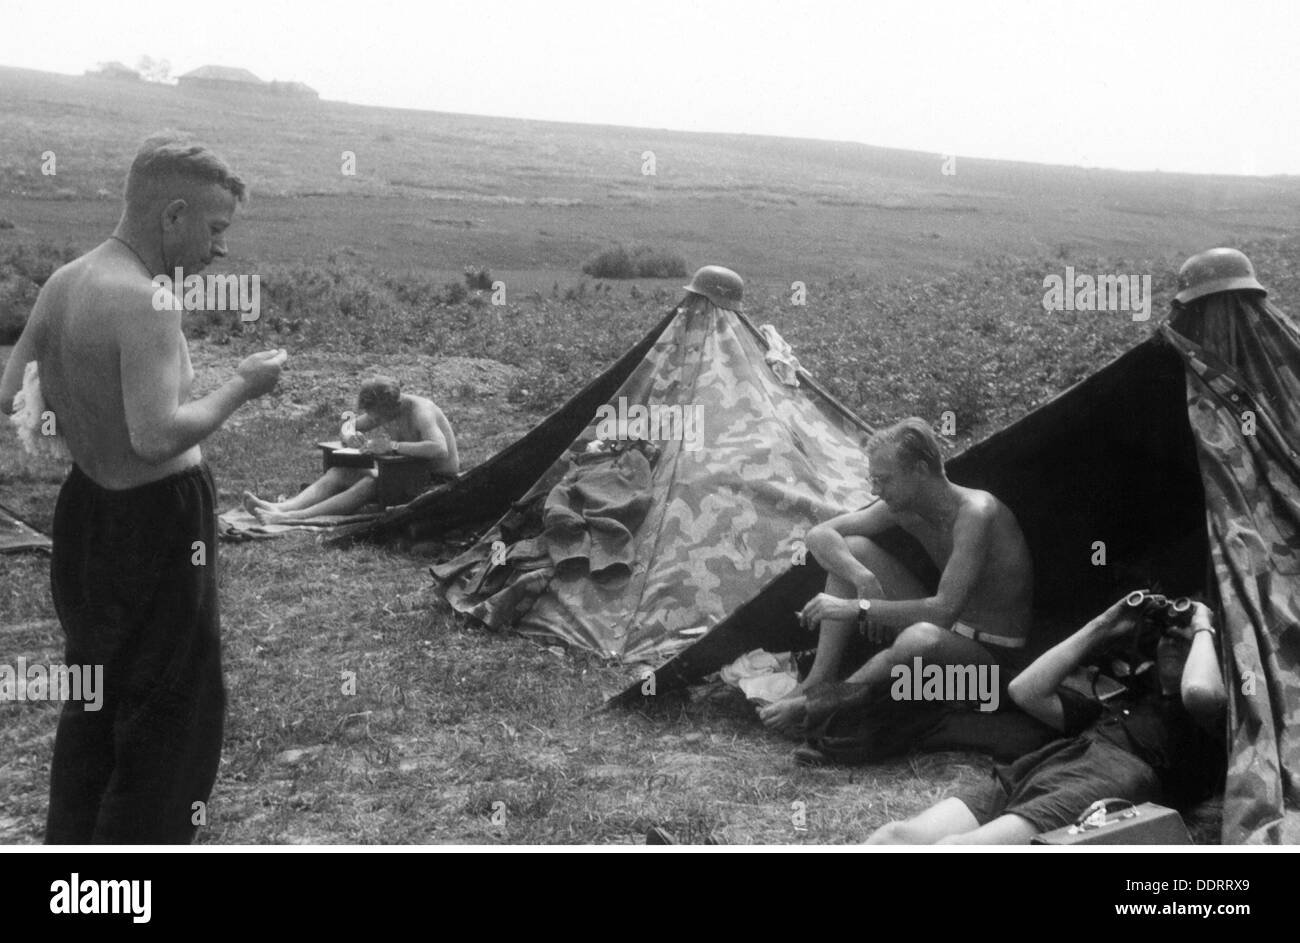 Second World War / WWII, propaganda, Germany, war correspondents of the 3rd Air Force War Correspondent Company, bivouac near Dukhovshchina, Russia, July 1941, Additional-Rights-Clearences-Not Available Stock Photo